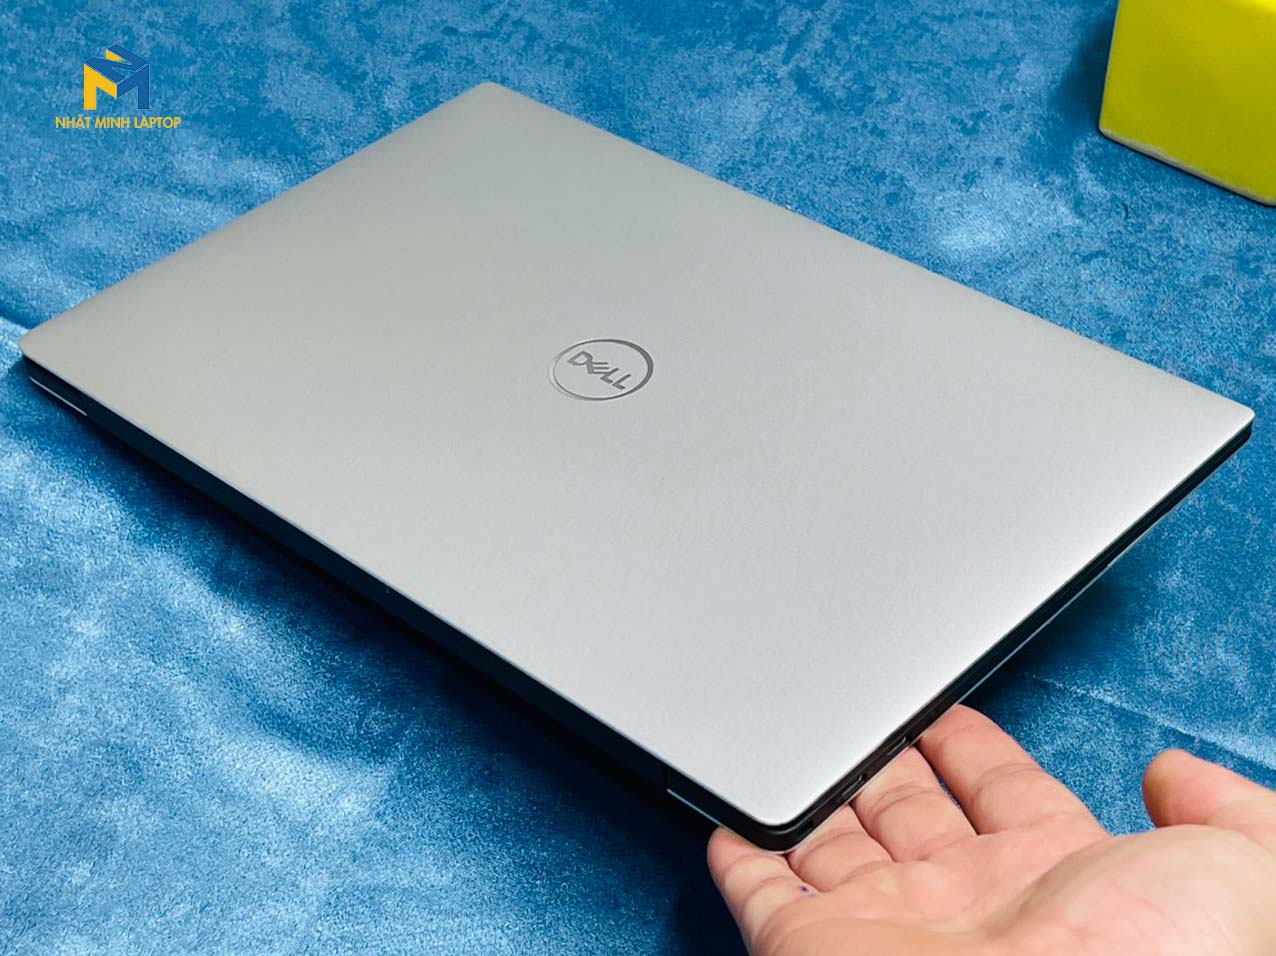 dell xps 13 7390 i5 review